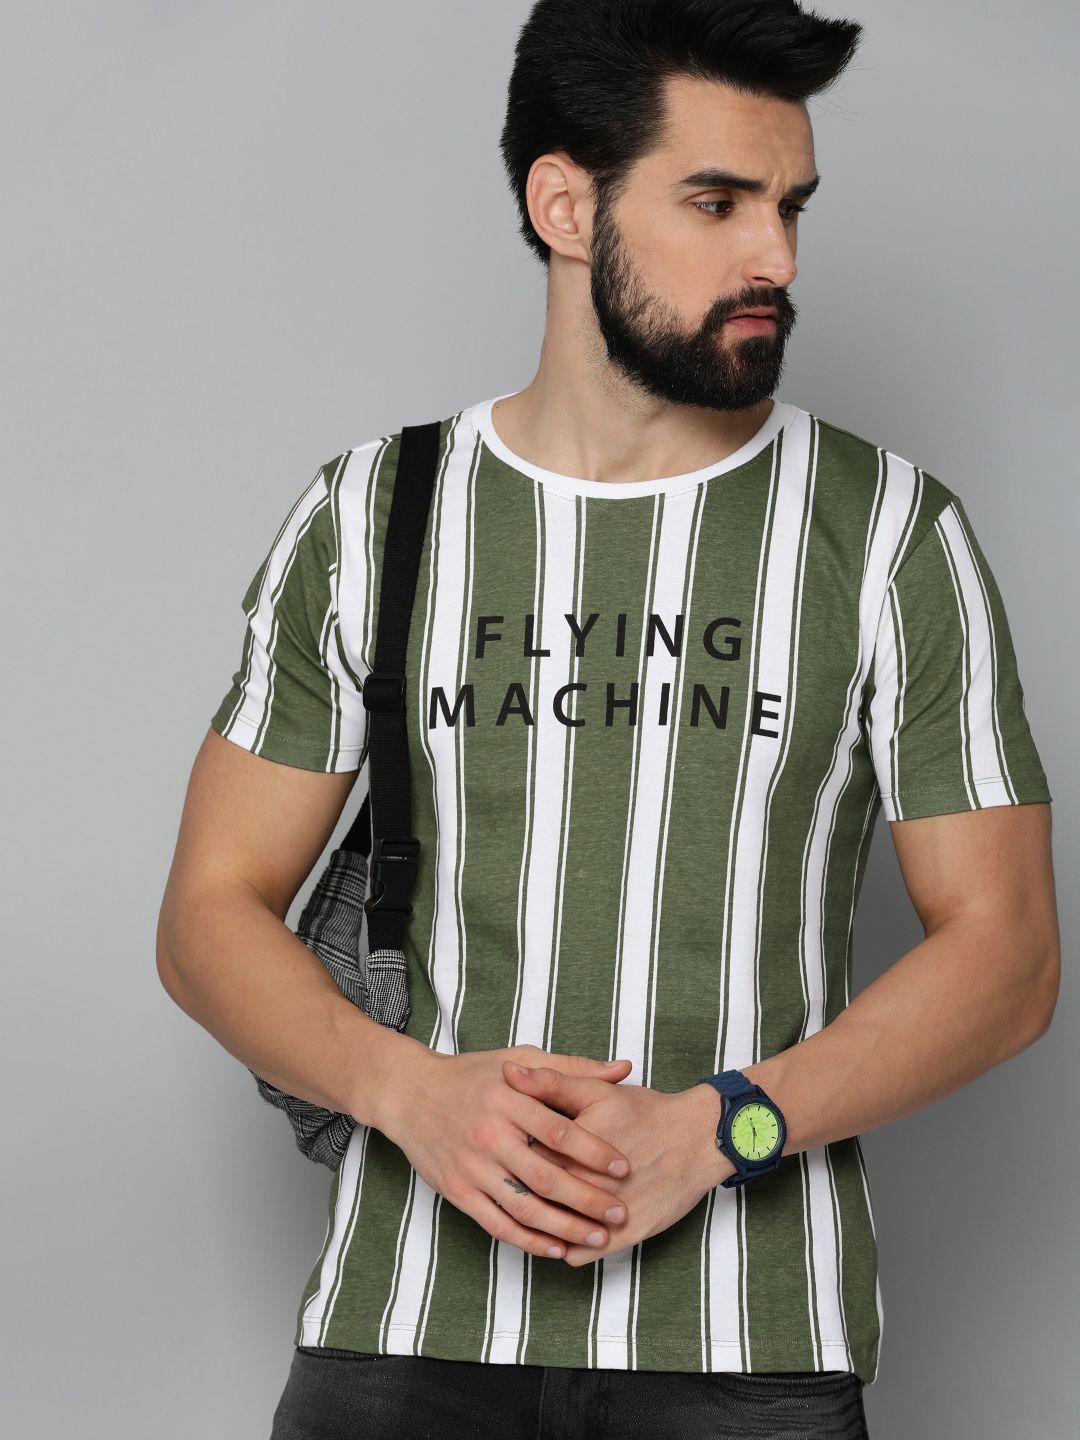 flying machine men olive green & white striped pure cotton t-shirt